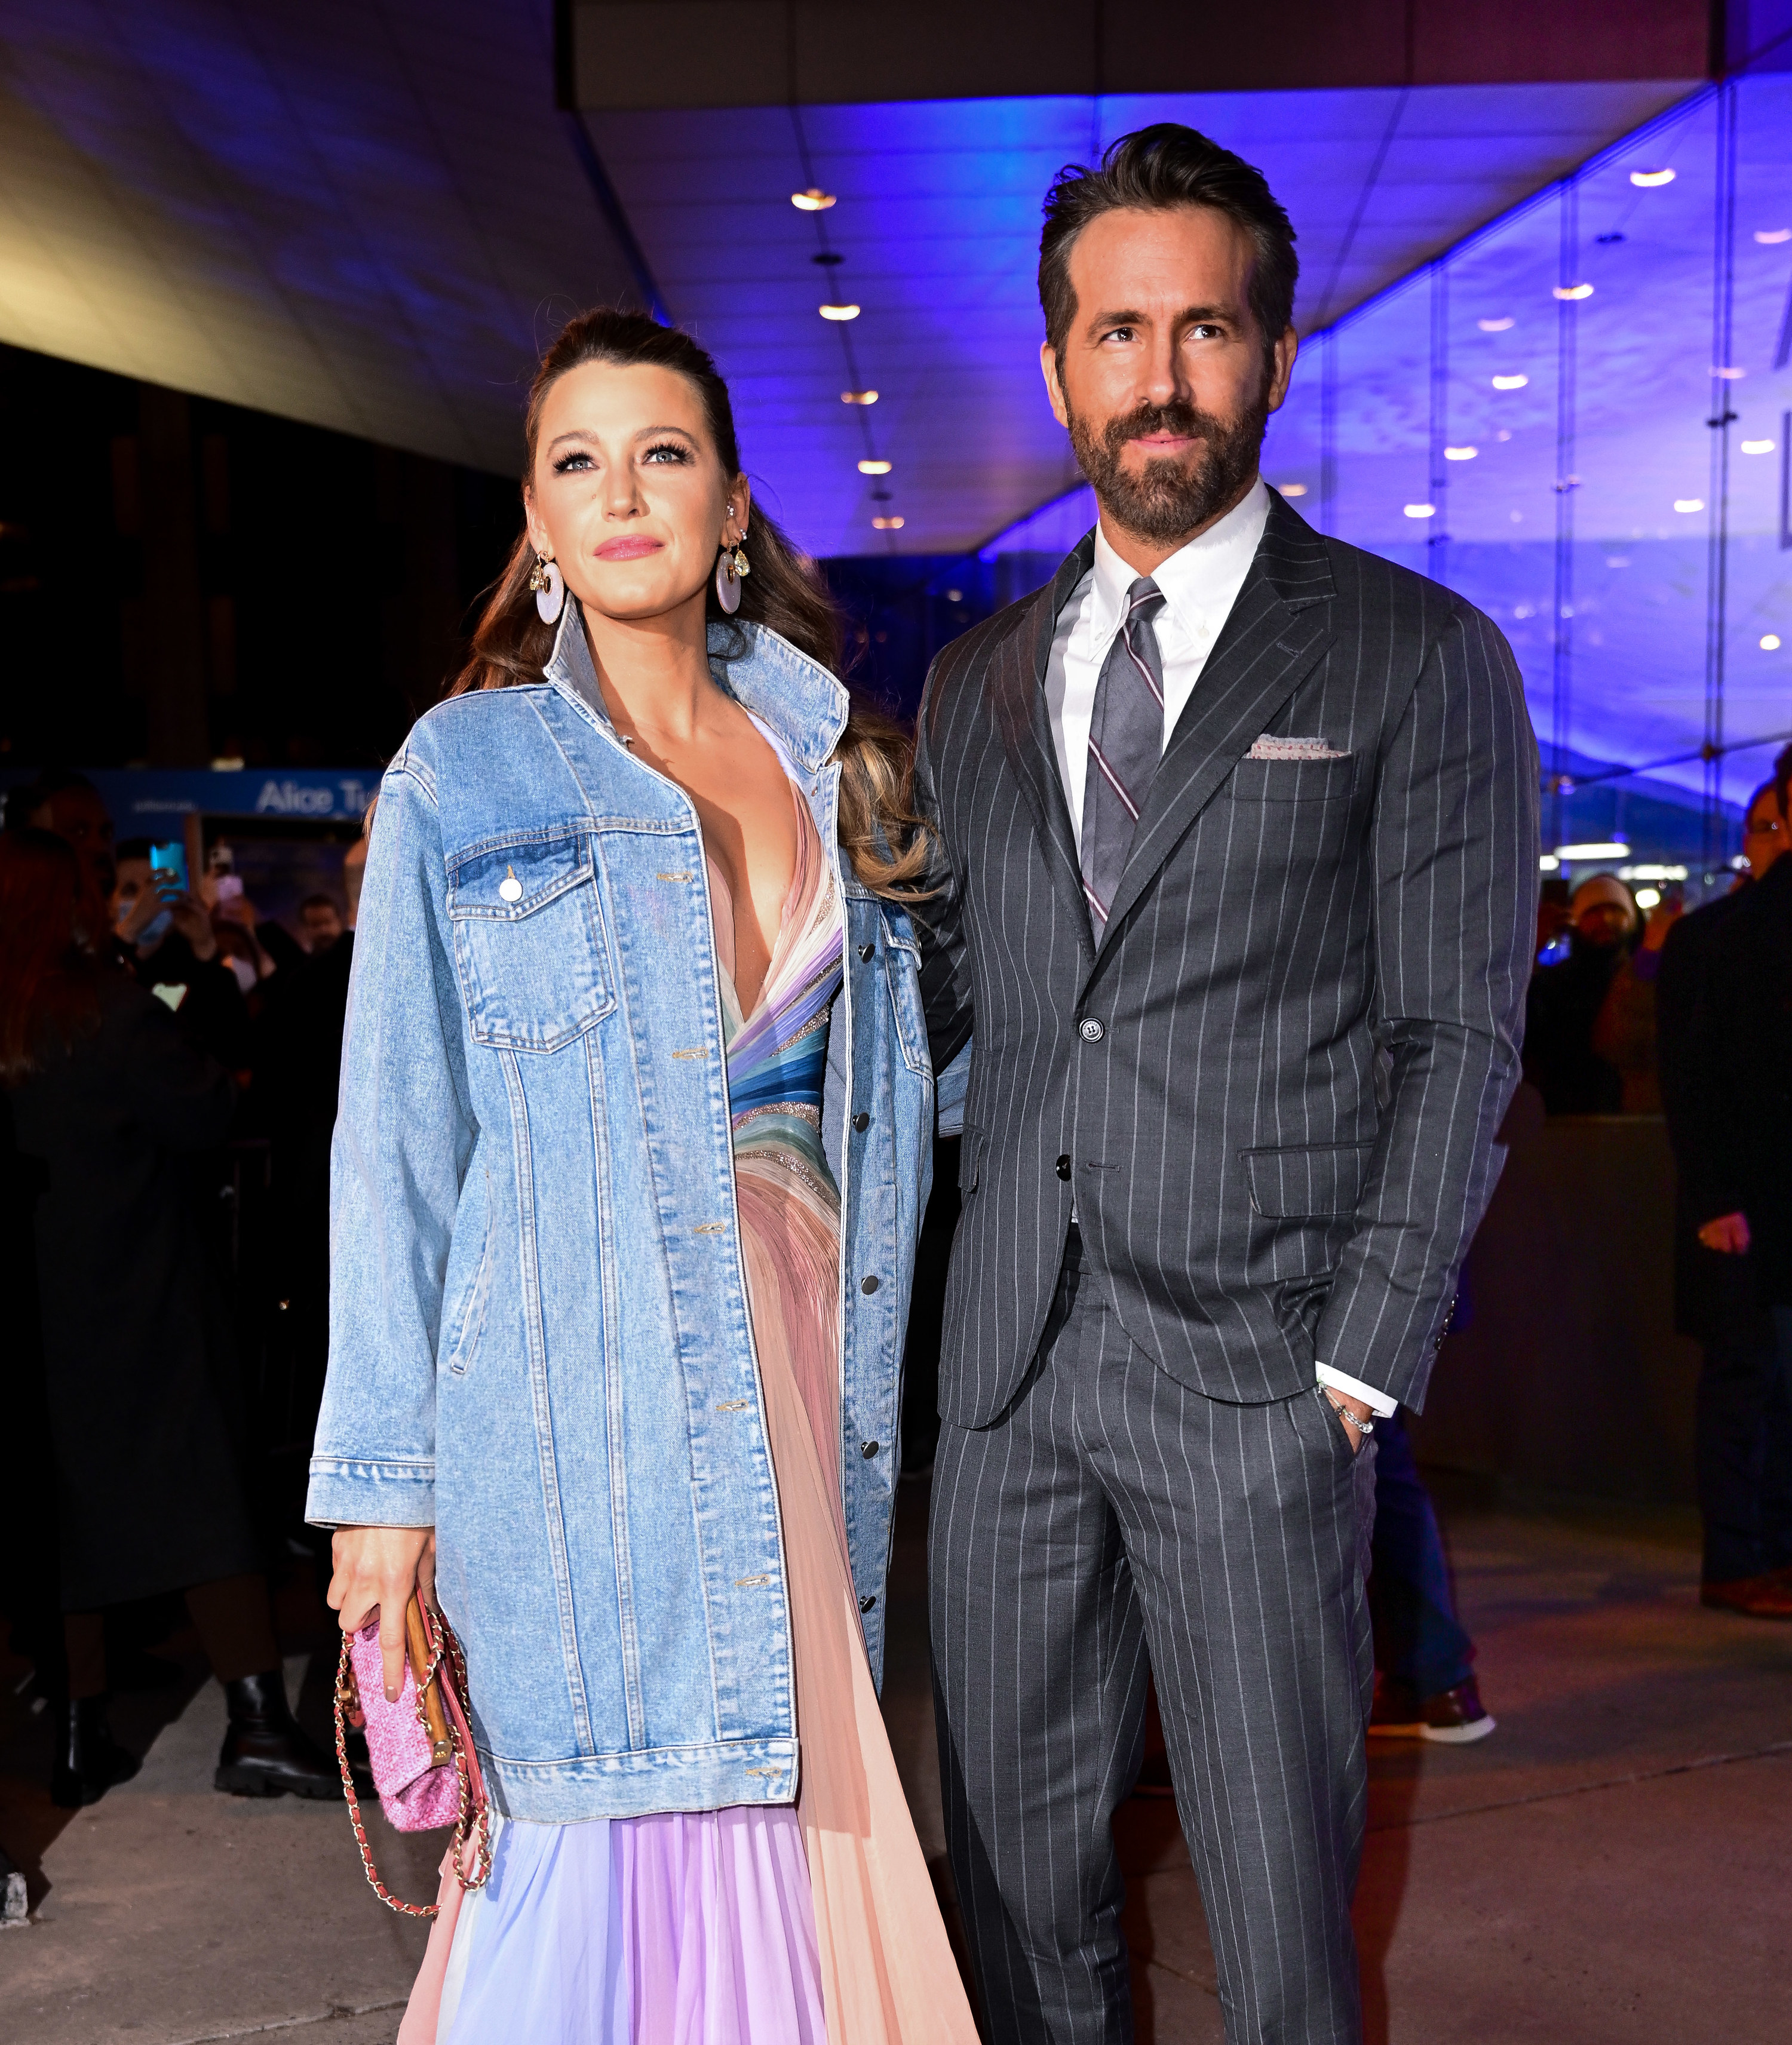 Blake Lively and Ryan Reynolds pose together at event